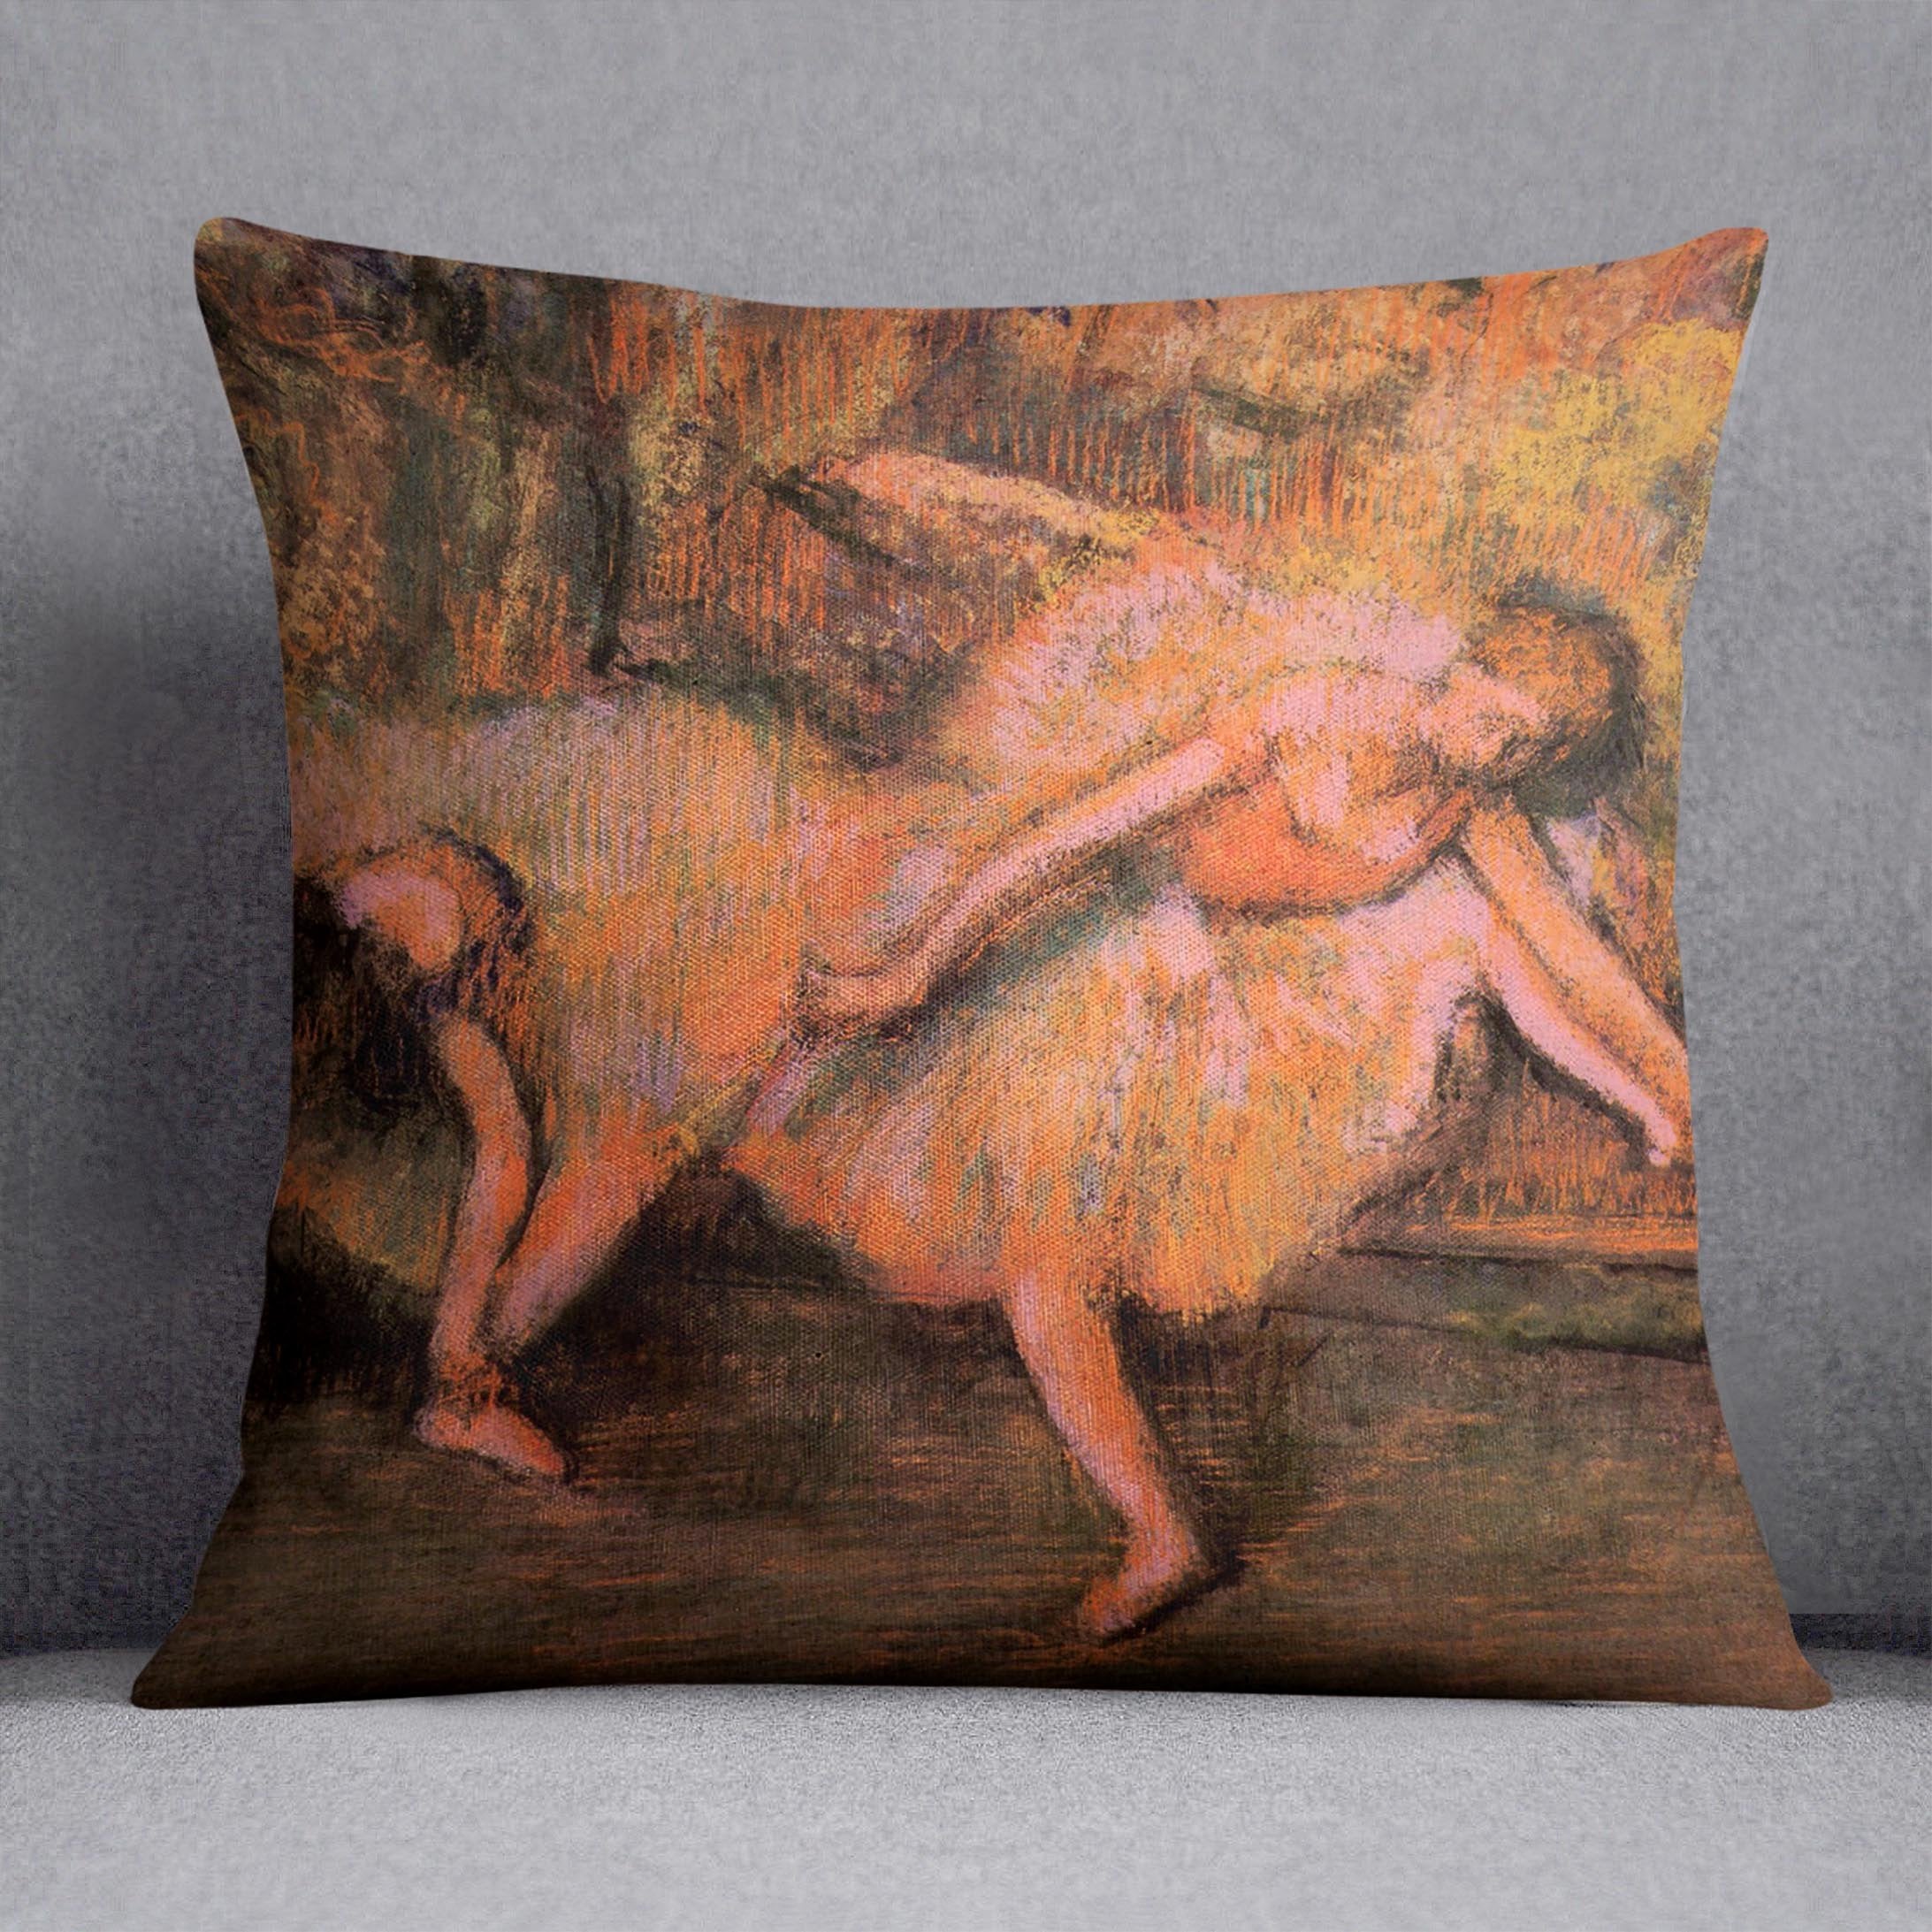 Two dancers on a bank by Degas Cushion